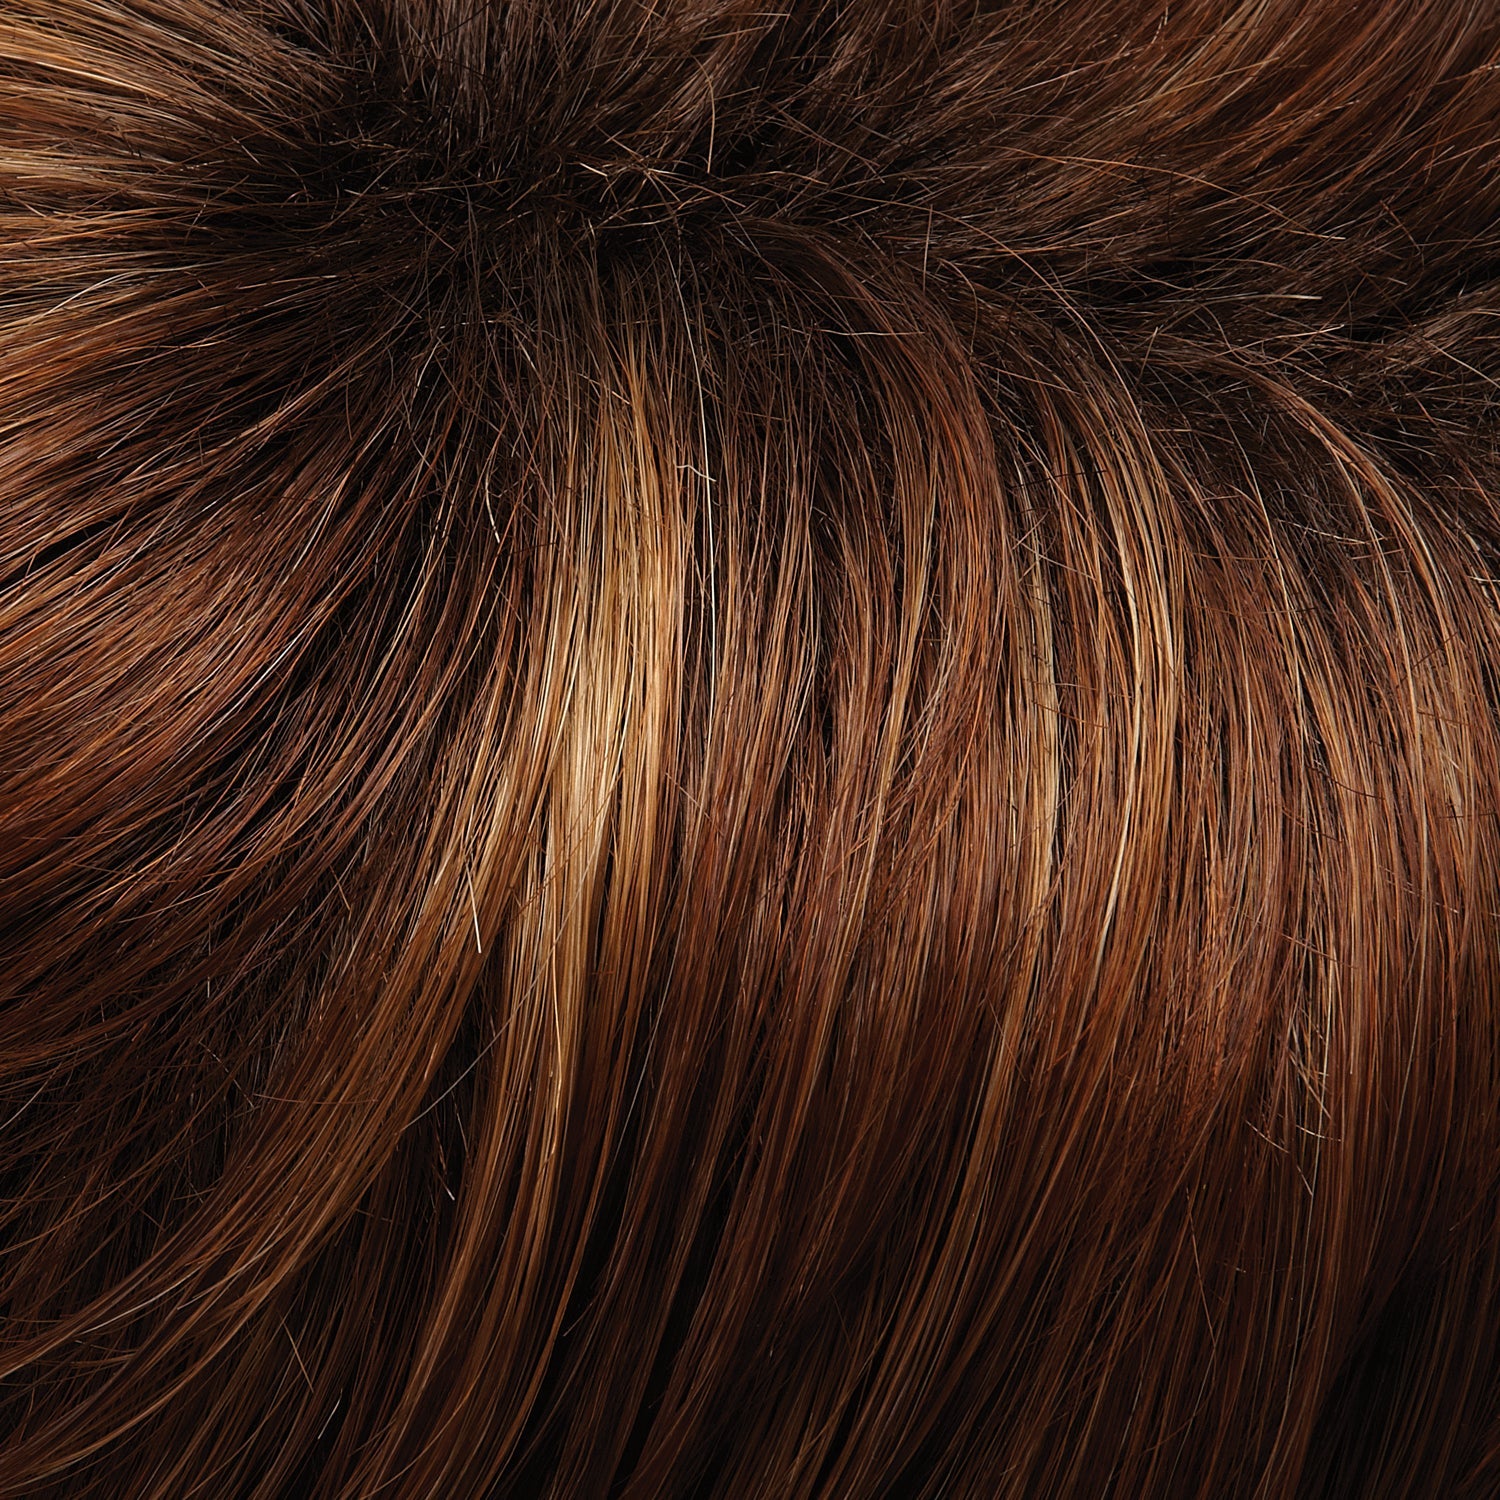 30A27S4 Medium Natural Red and Medium Red-Gold Blonde Blend, Shaded with Dark Brown